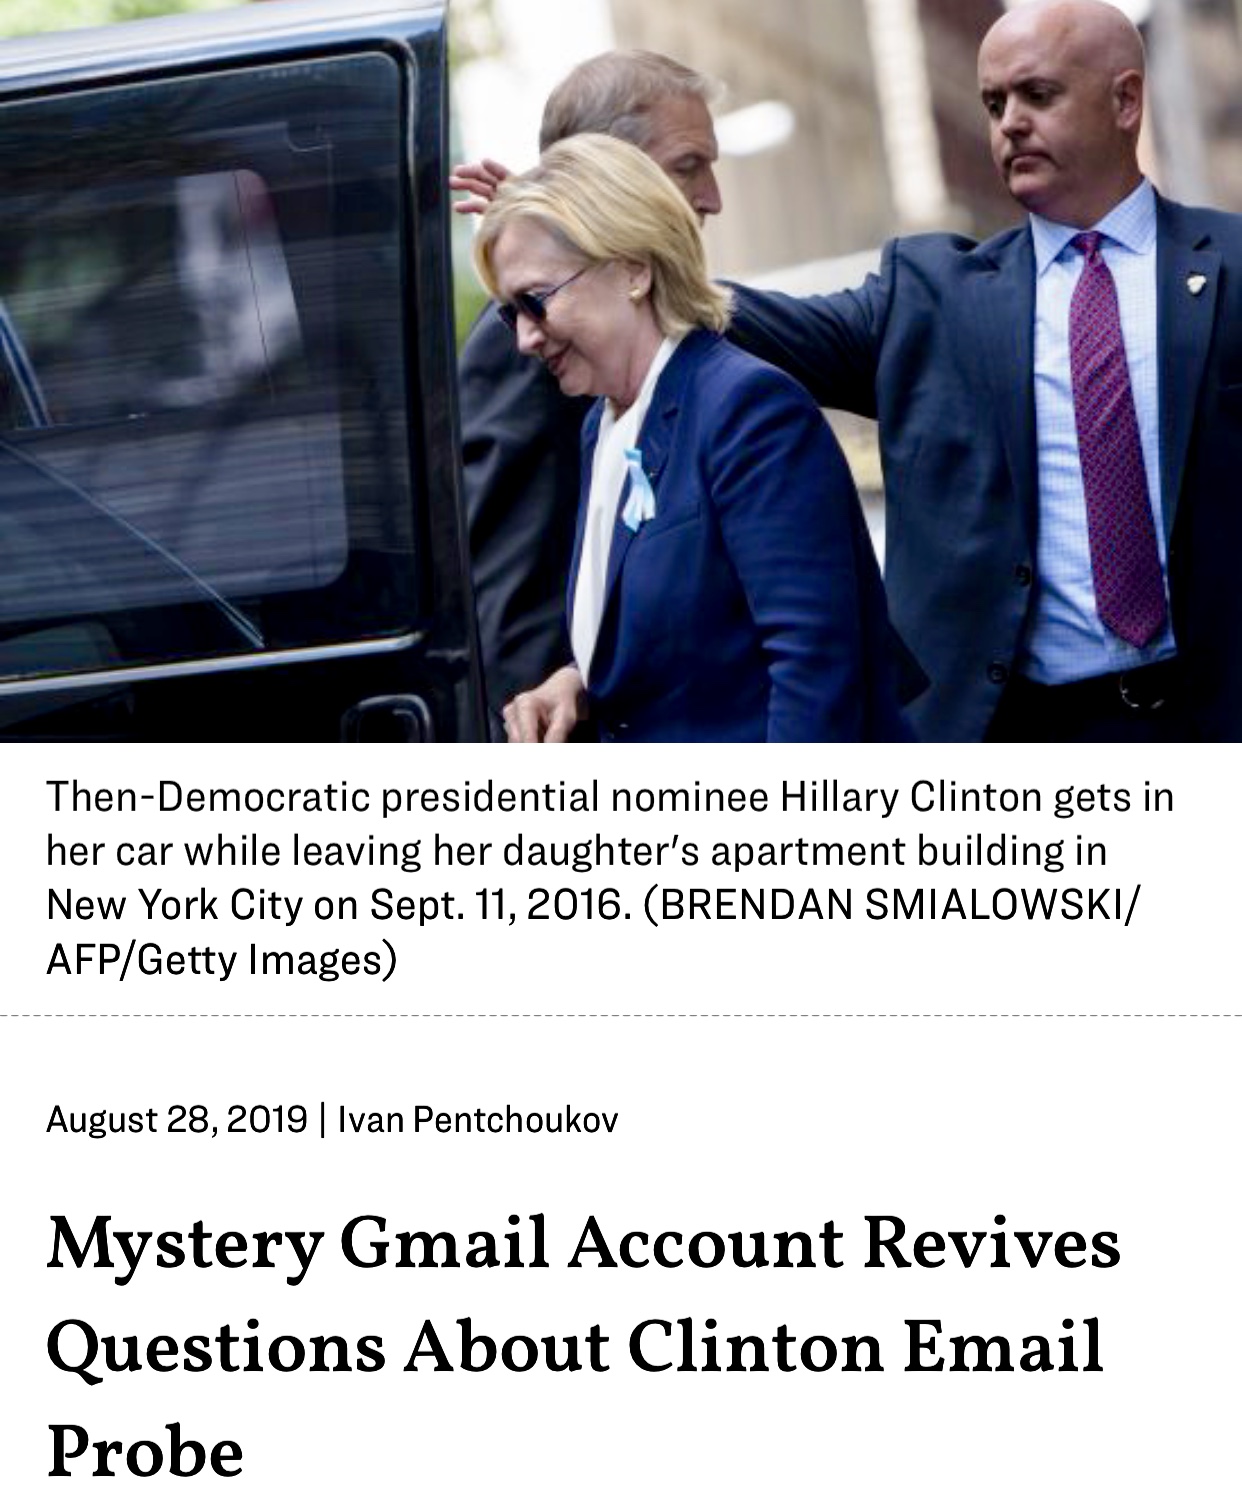 Mystery Gmail Account Revives Questions About Clinton Email Probe